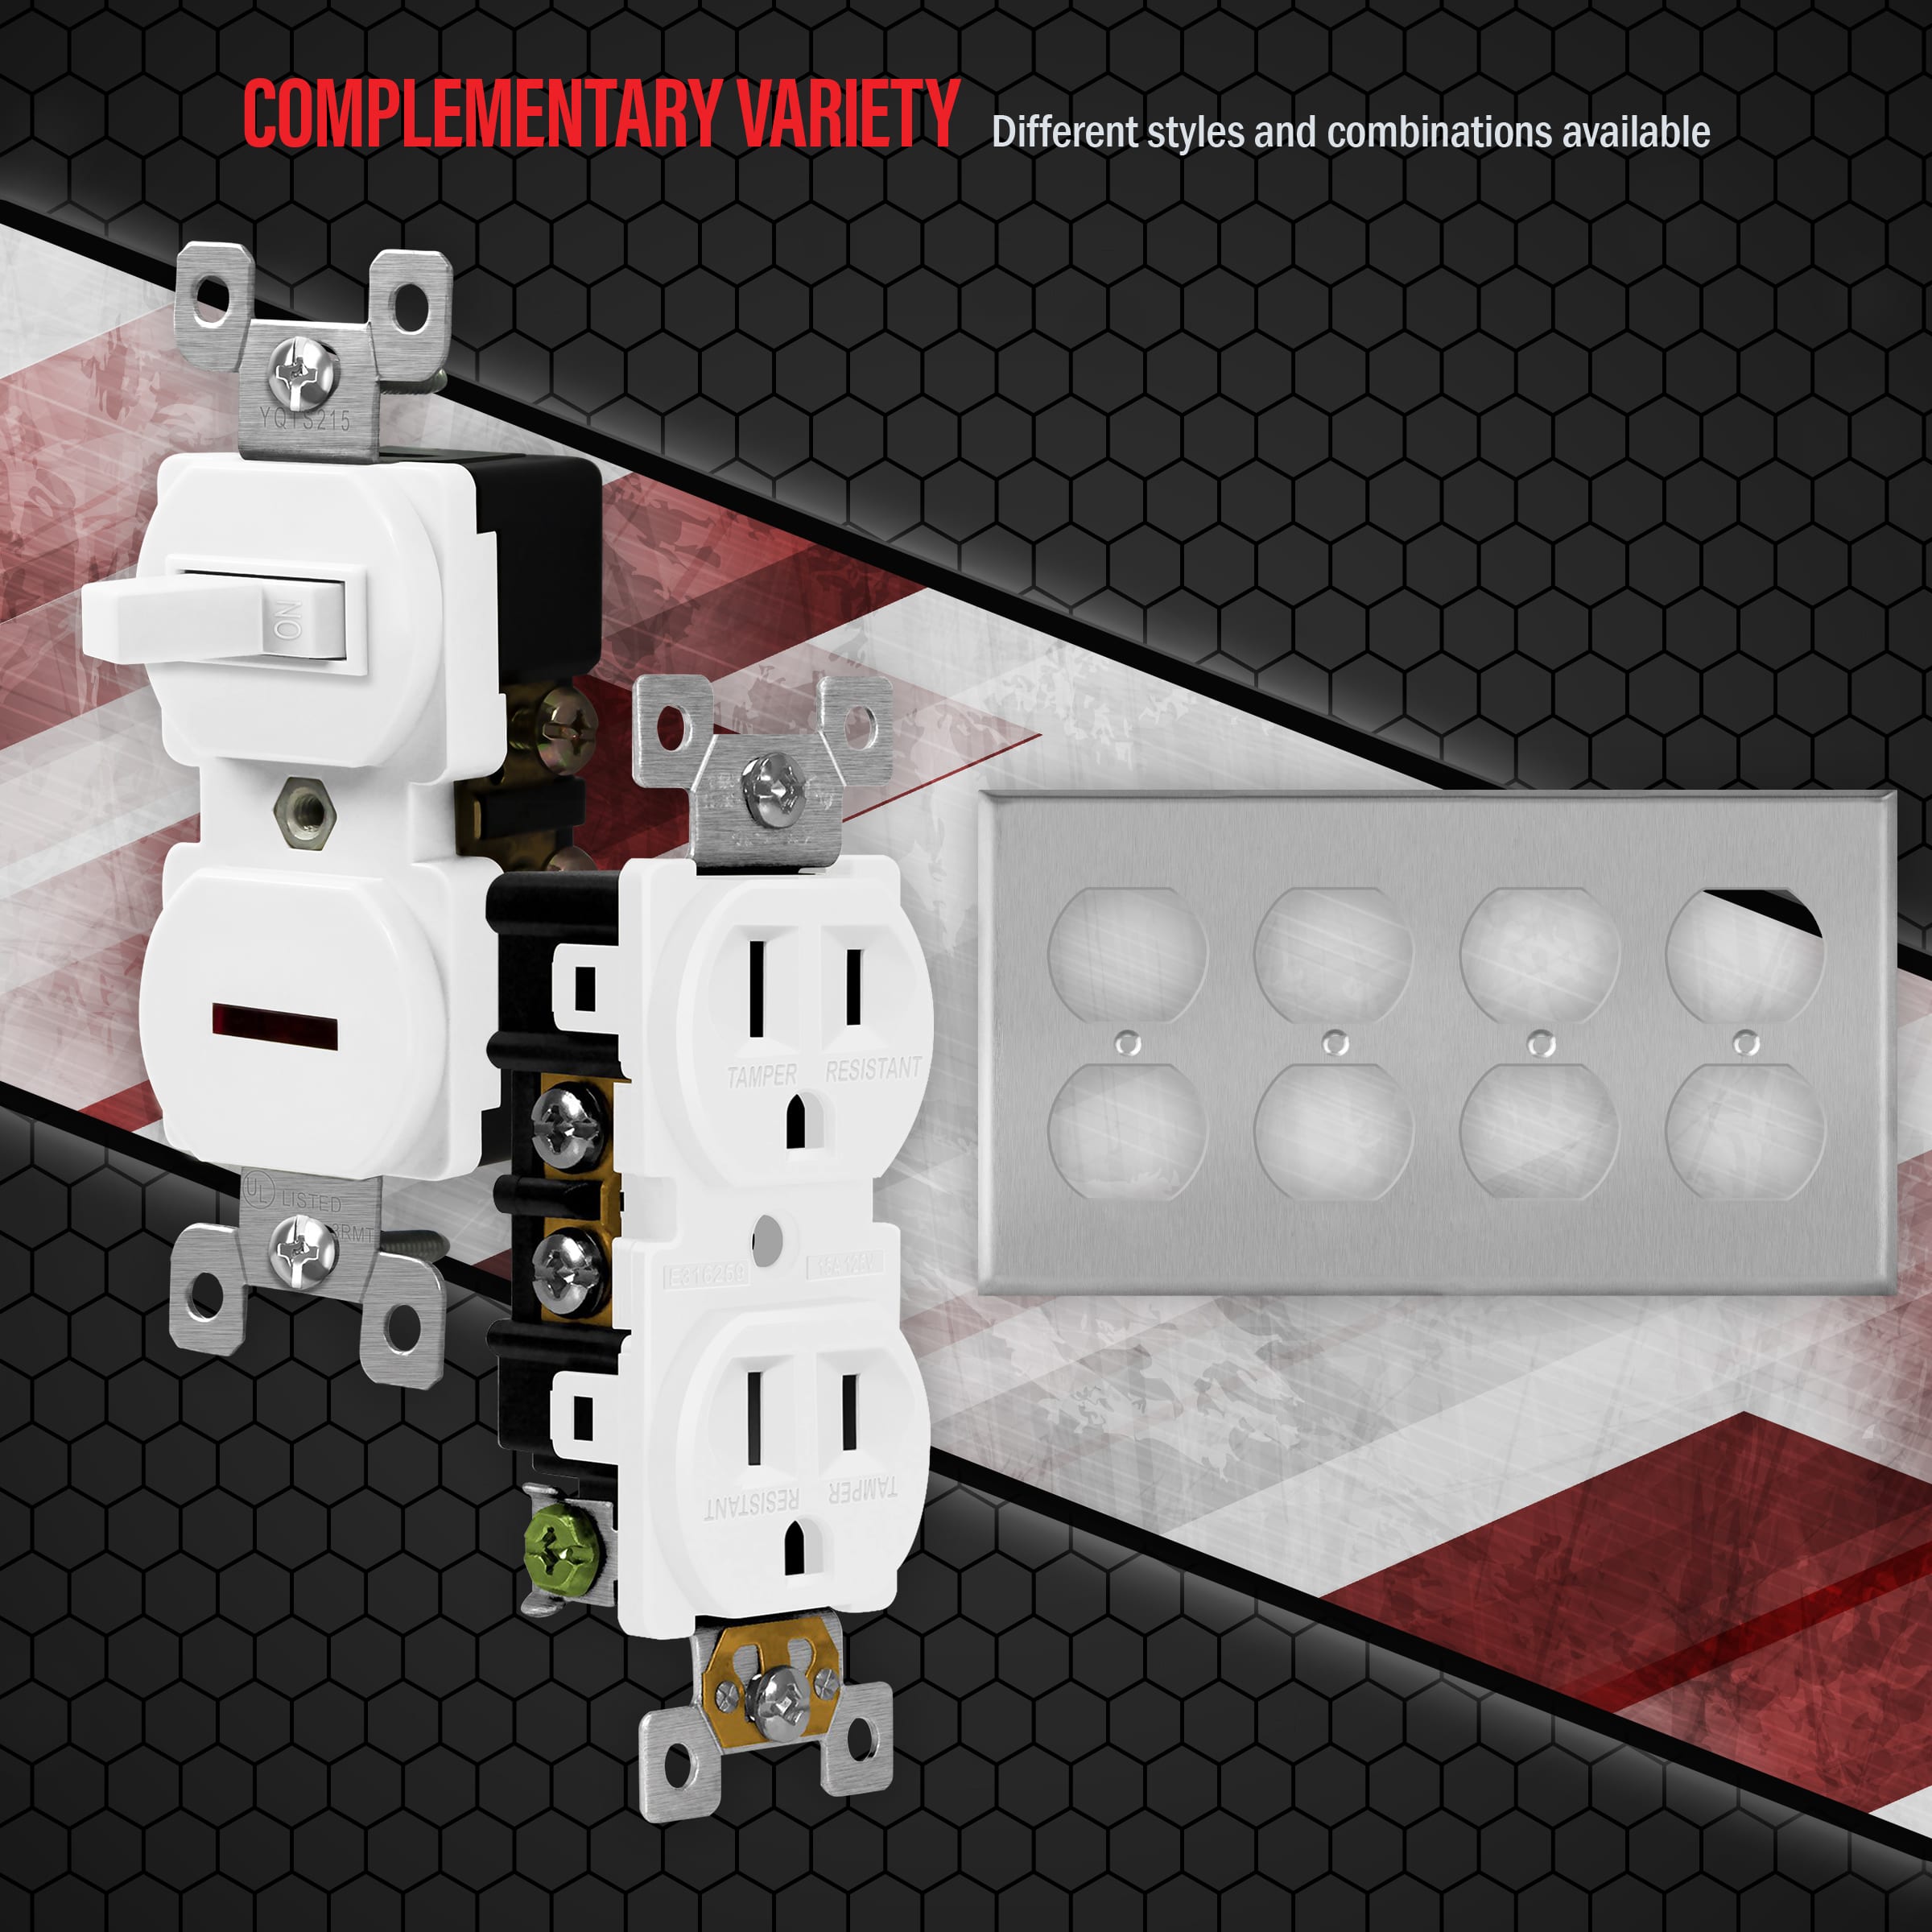 4-Gang Stainless Steel Duplex Outlet Wall Plate